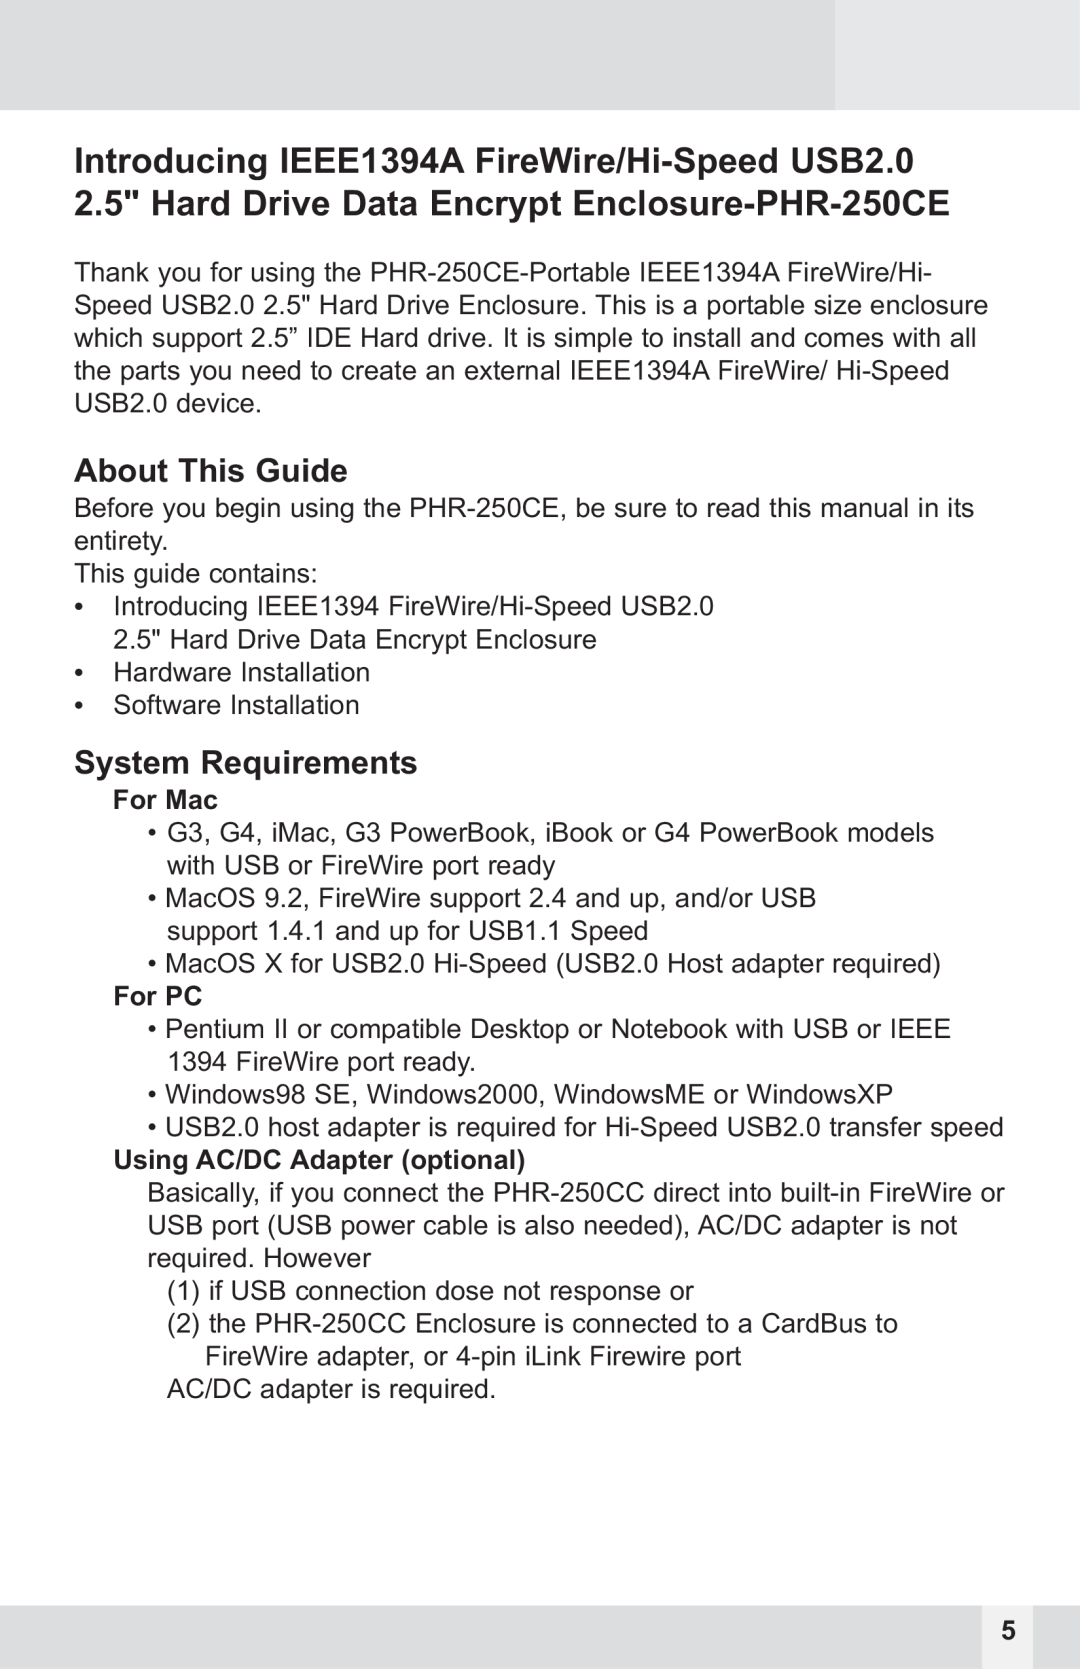 Macally PHR-250CE user manual For Mac, For PC, Using AC/DC Adapter optional 